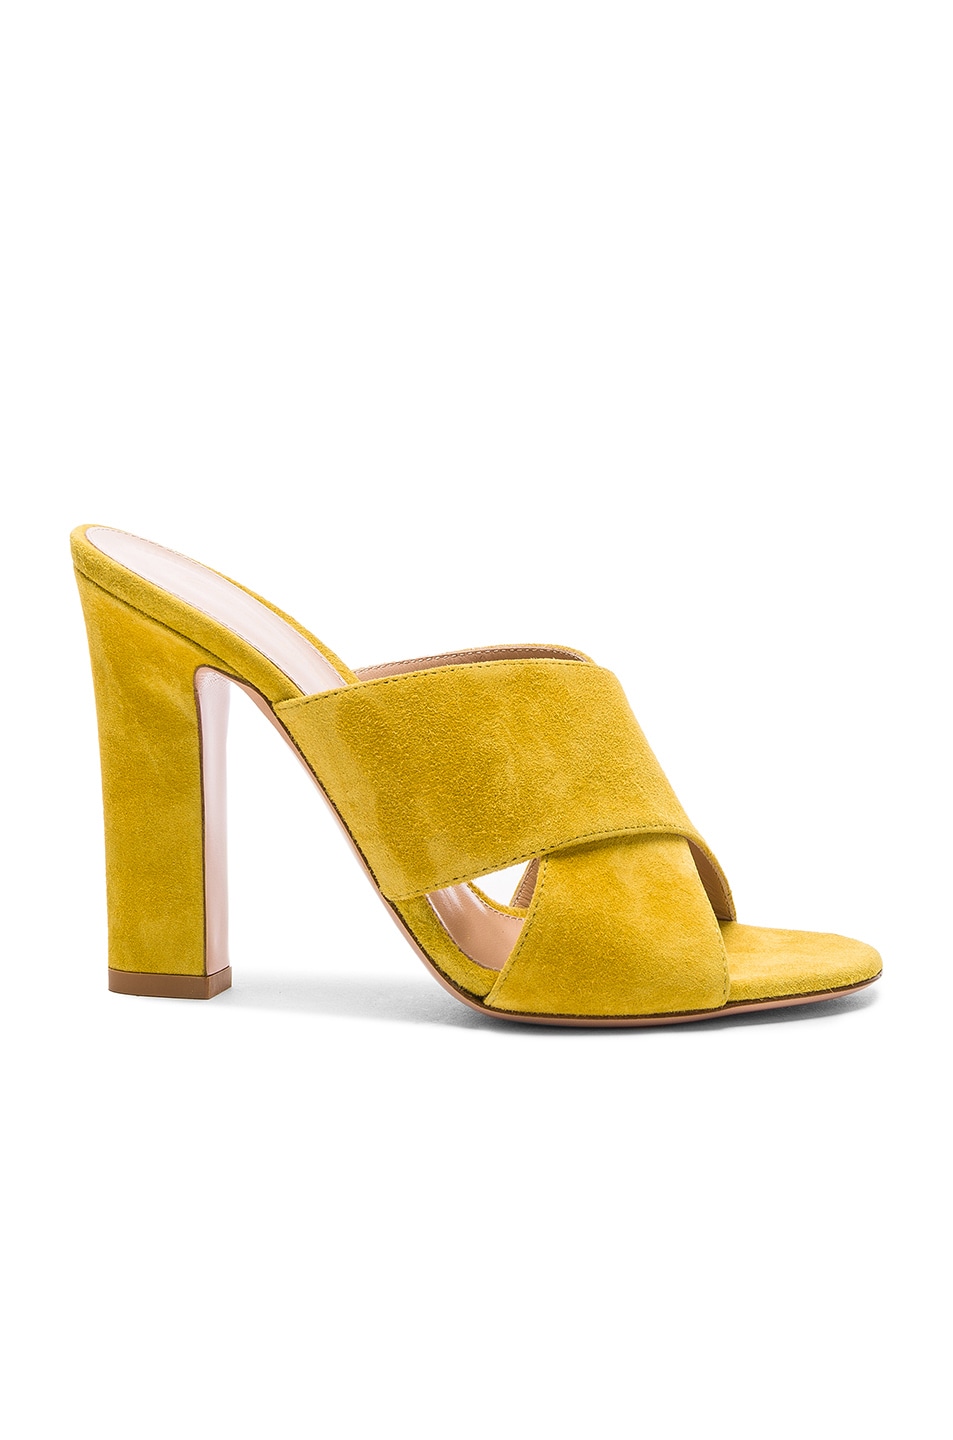 Image 1 of Gianvito Rossi Suede Mules in Mustard